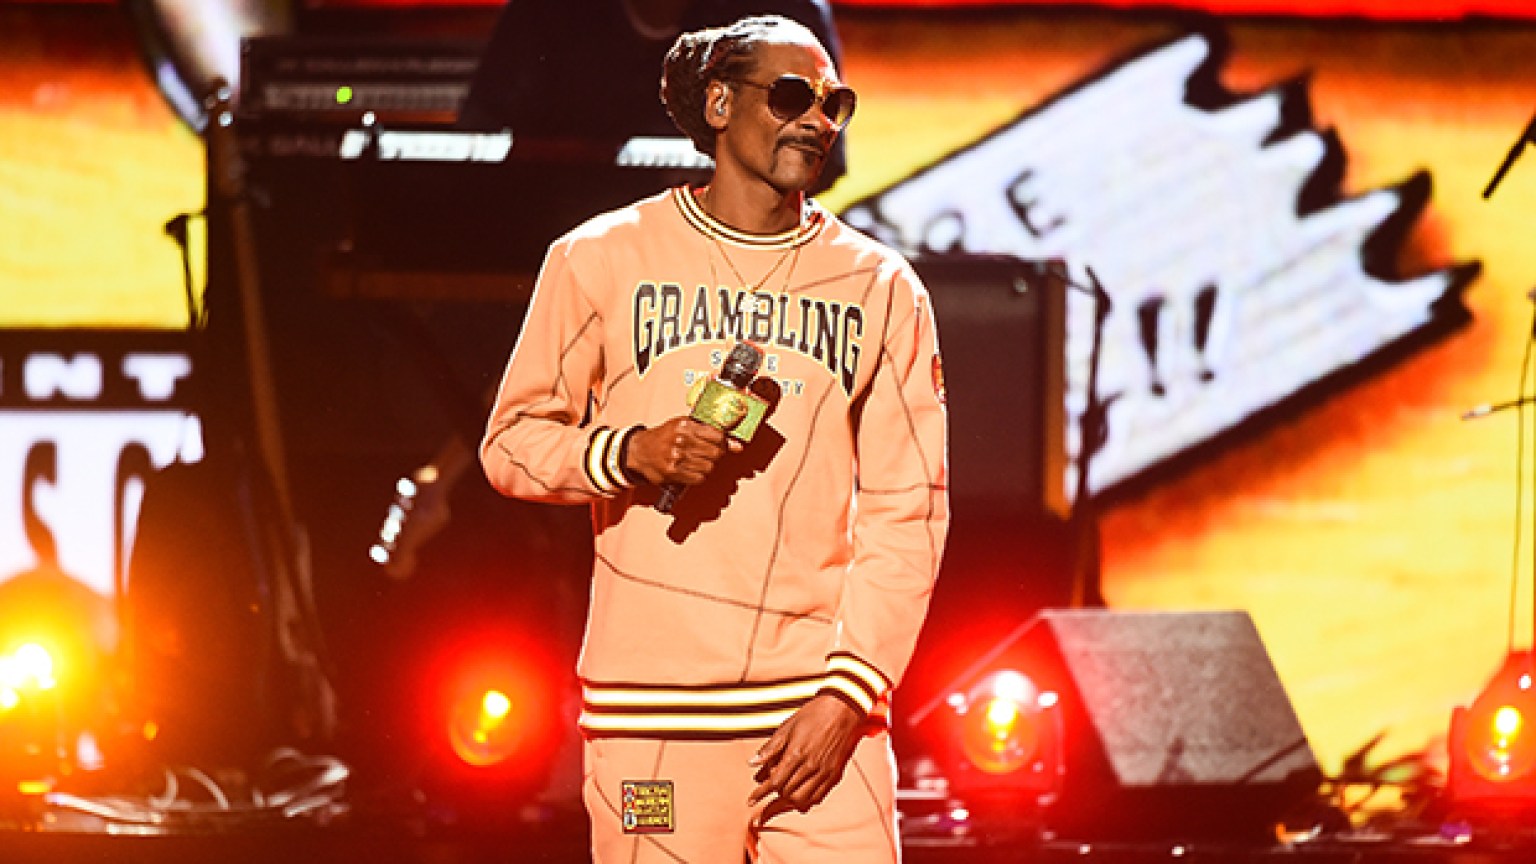 Snoop Dogg’s BET Awards Performance Video — Watch HIs Medley Of Hits